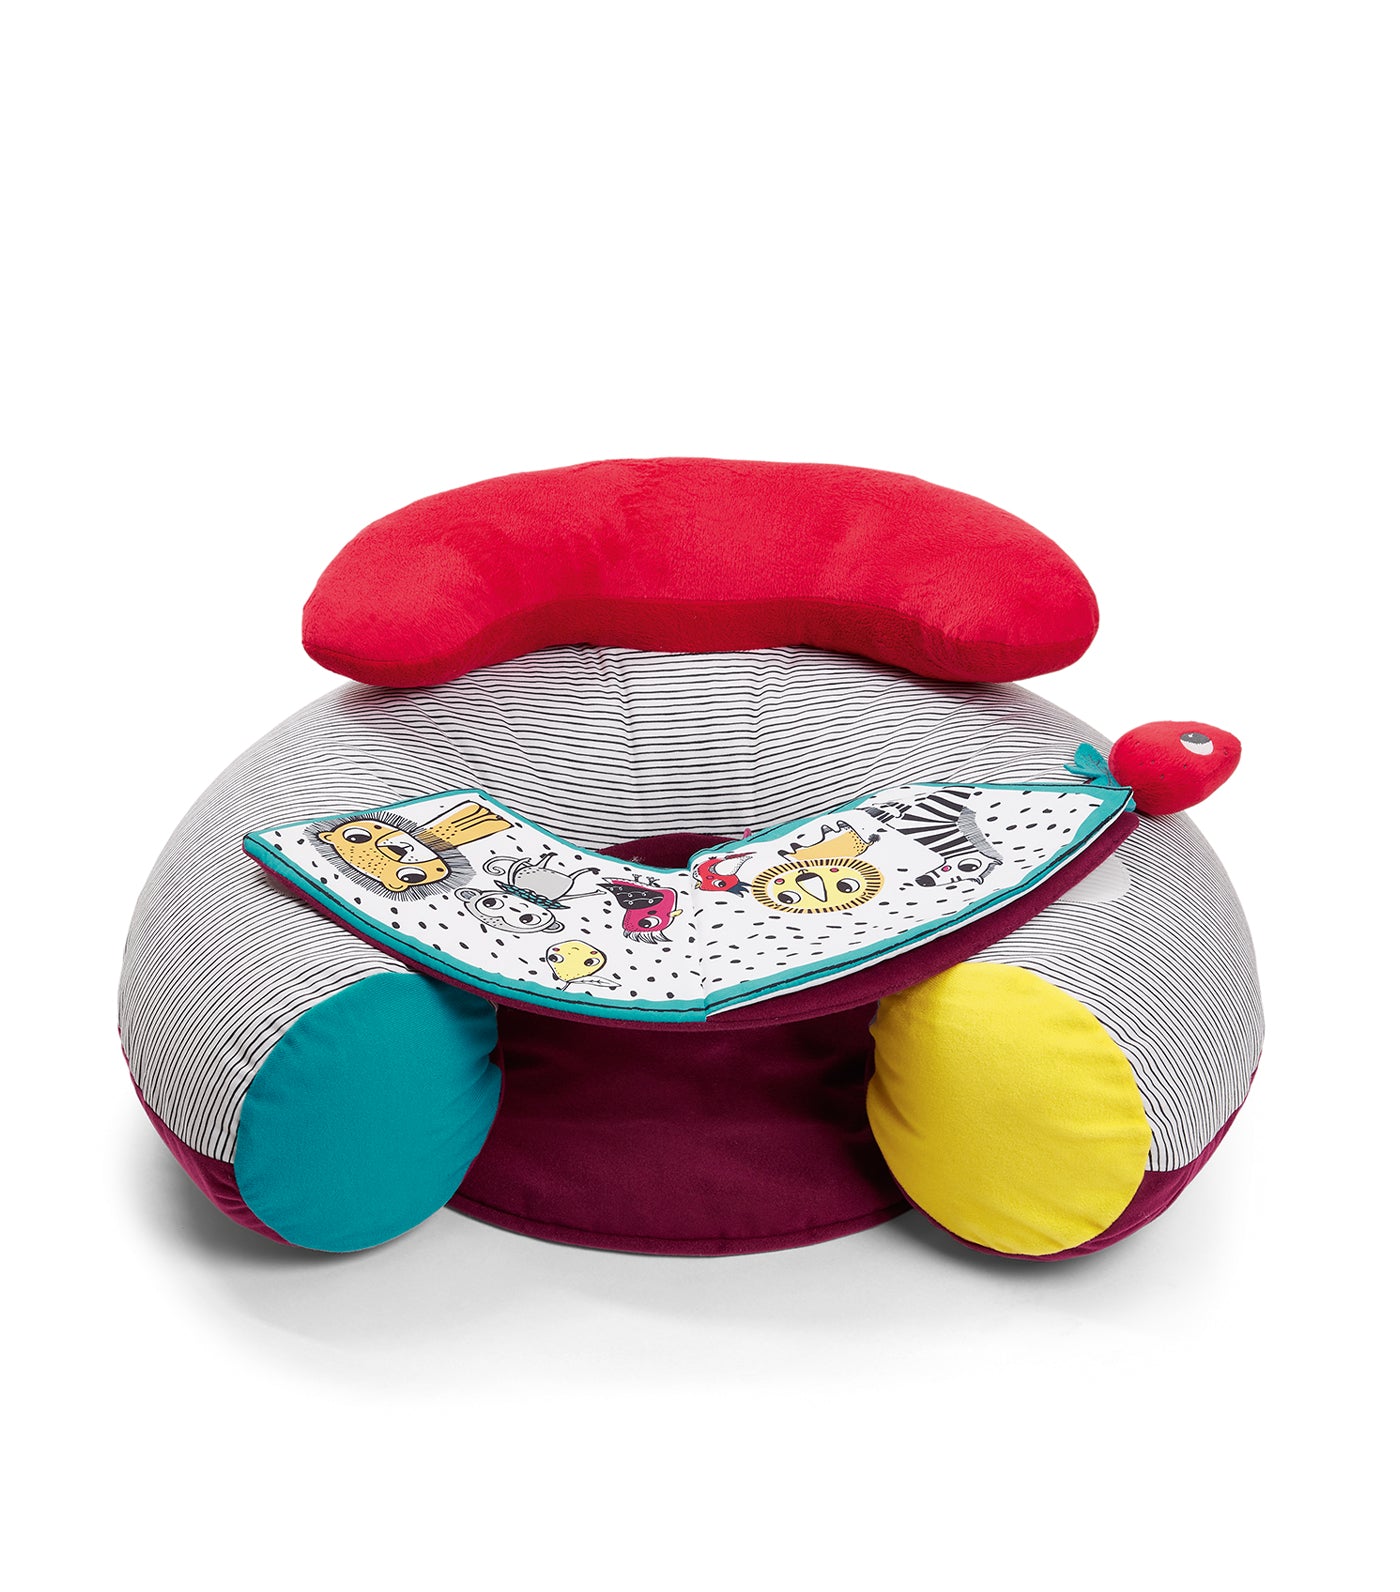 mamas & papas sit and play infant positioner - offspring